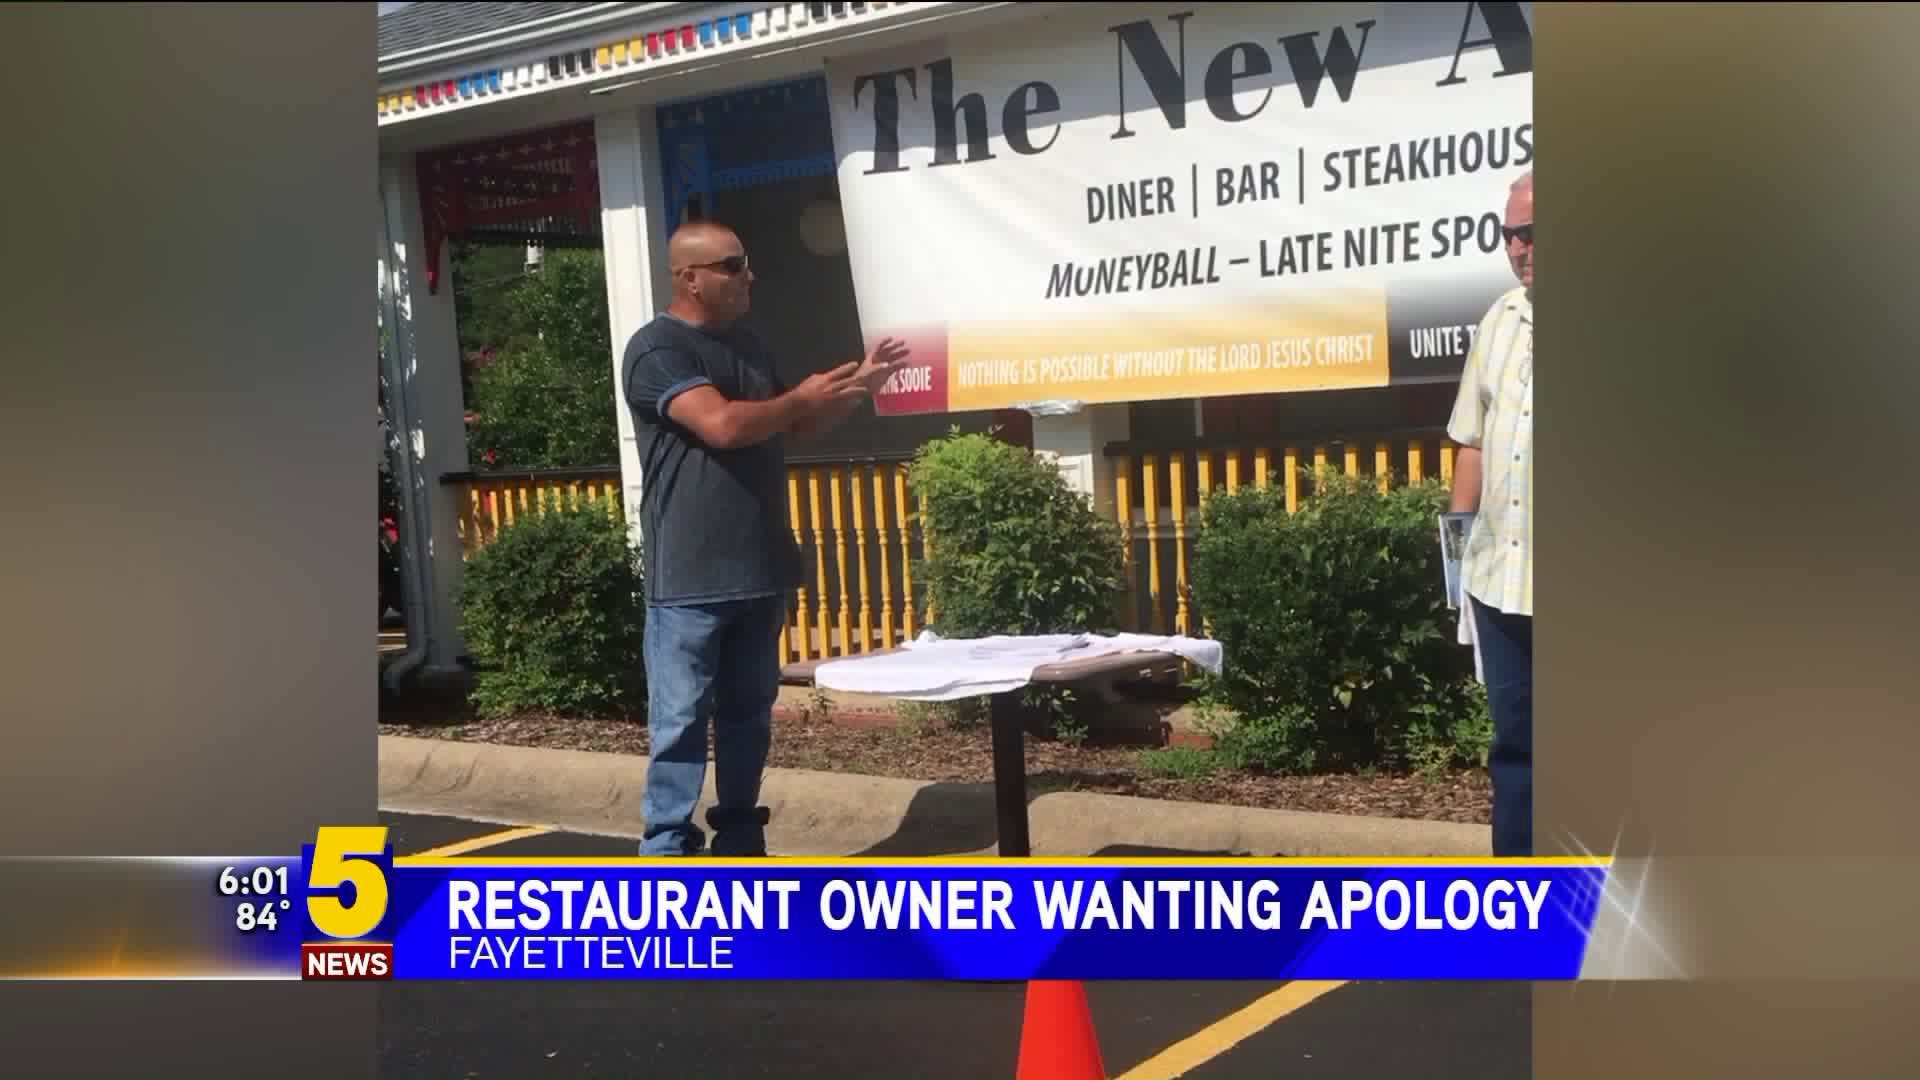 Fayetteville Restaurant Owner Wanting Apology from LGBTQ Community